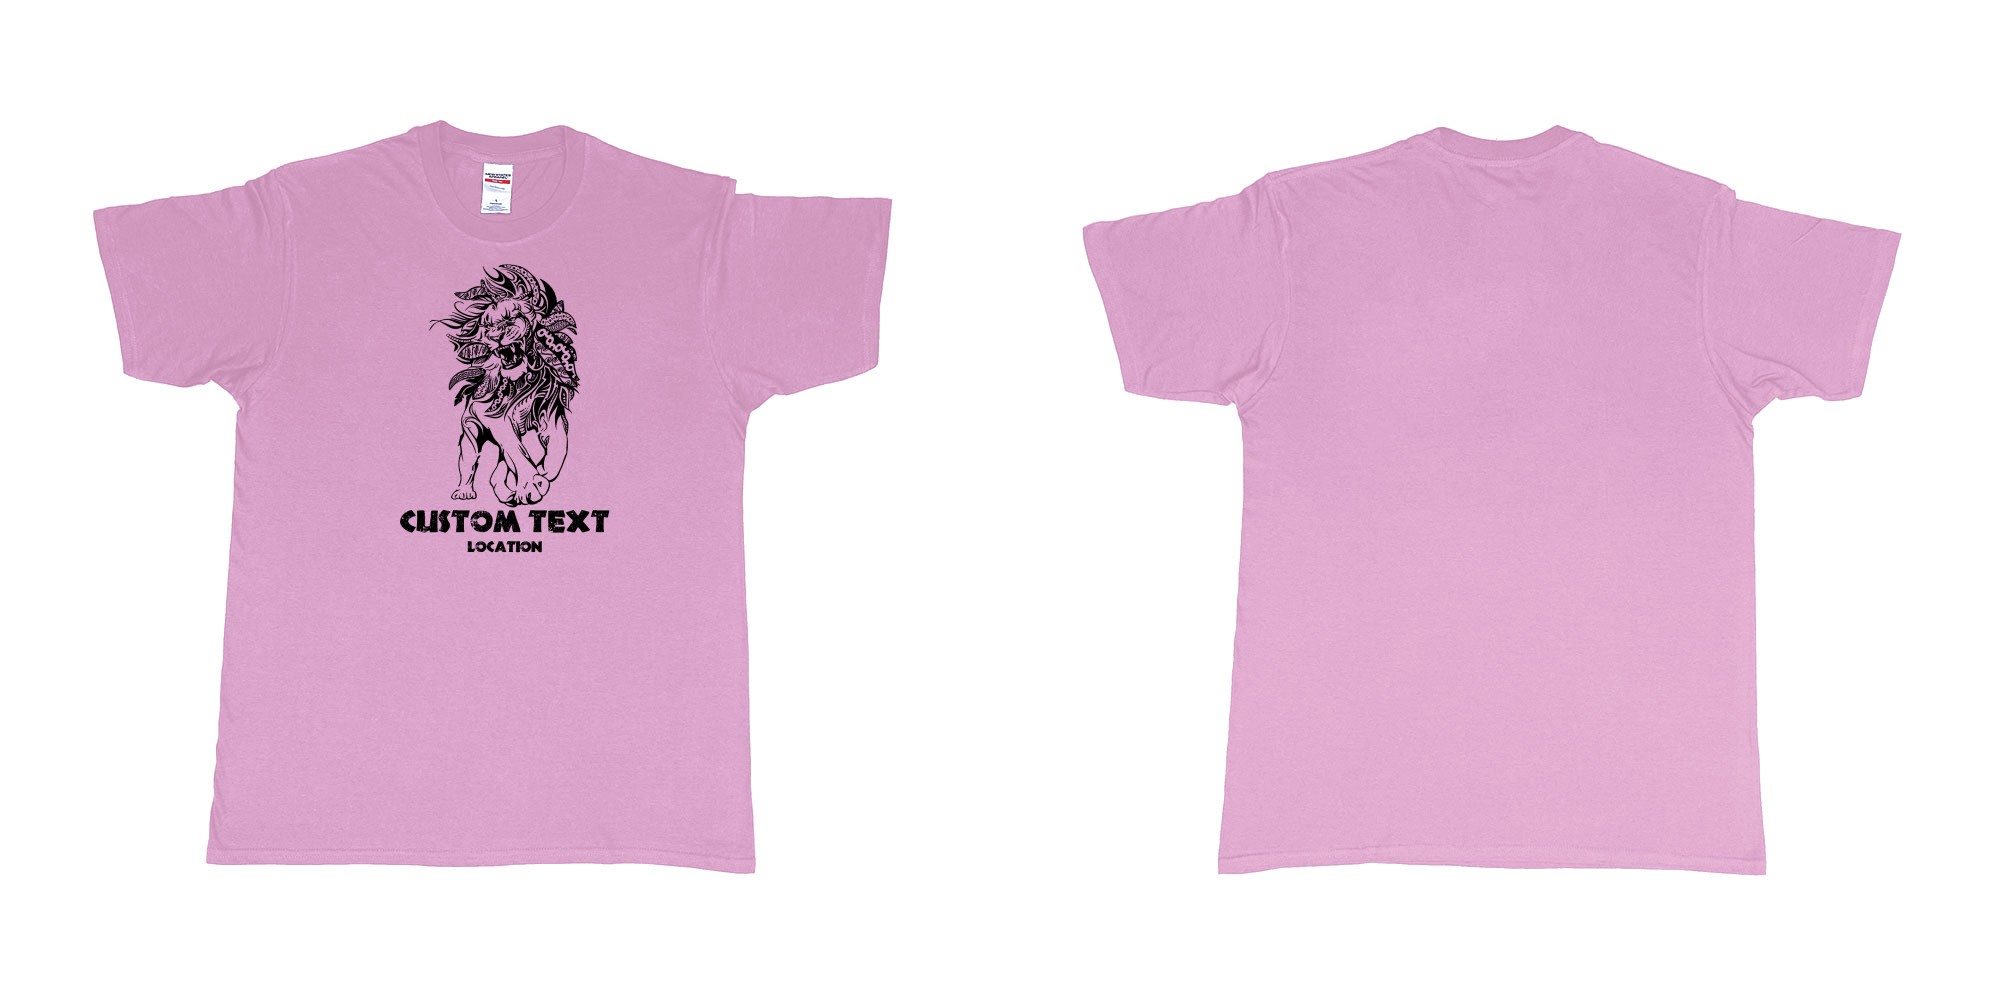 Custom tshirt design lion august tribal in fabric color light-pink choice your own text made in Bali by The Pirate Way